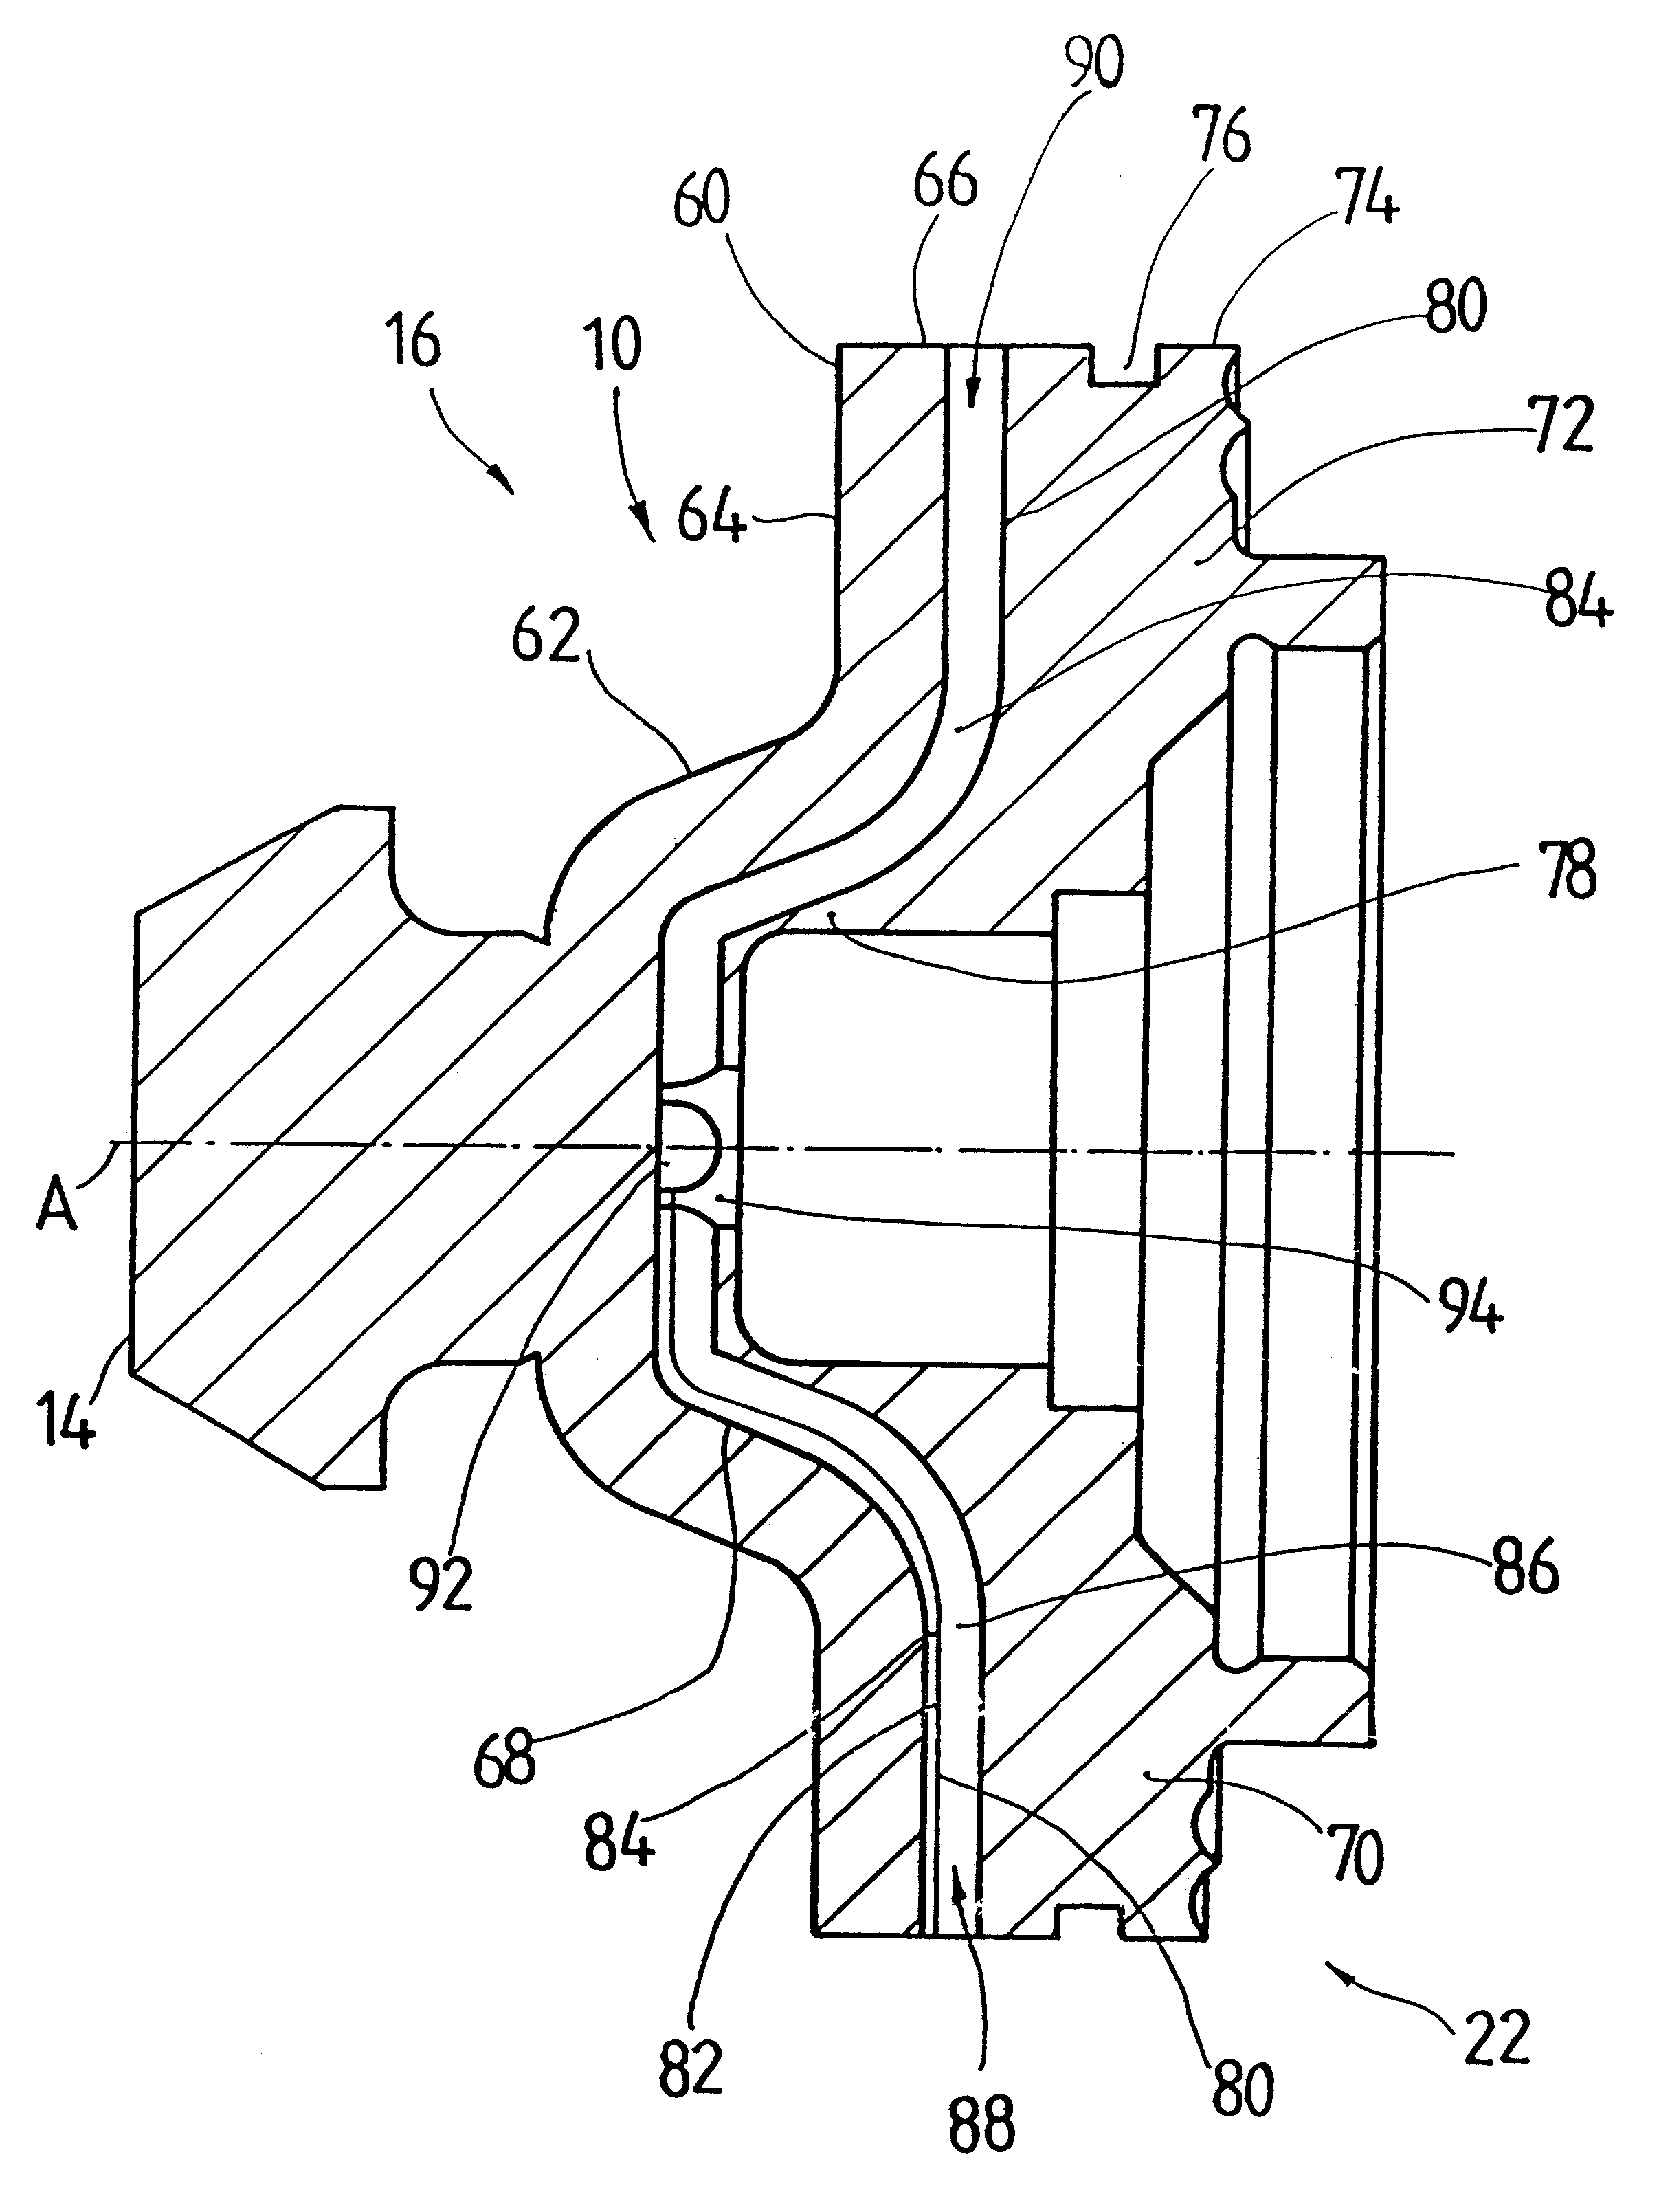 Hub arrangement for a hydrodynamic torque converter and method for producing same